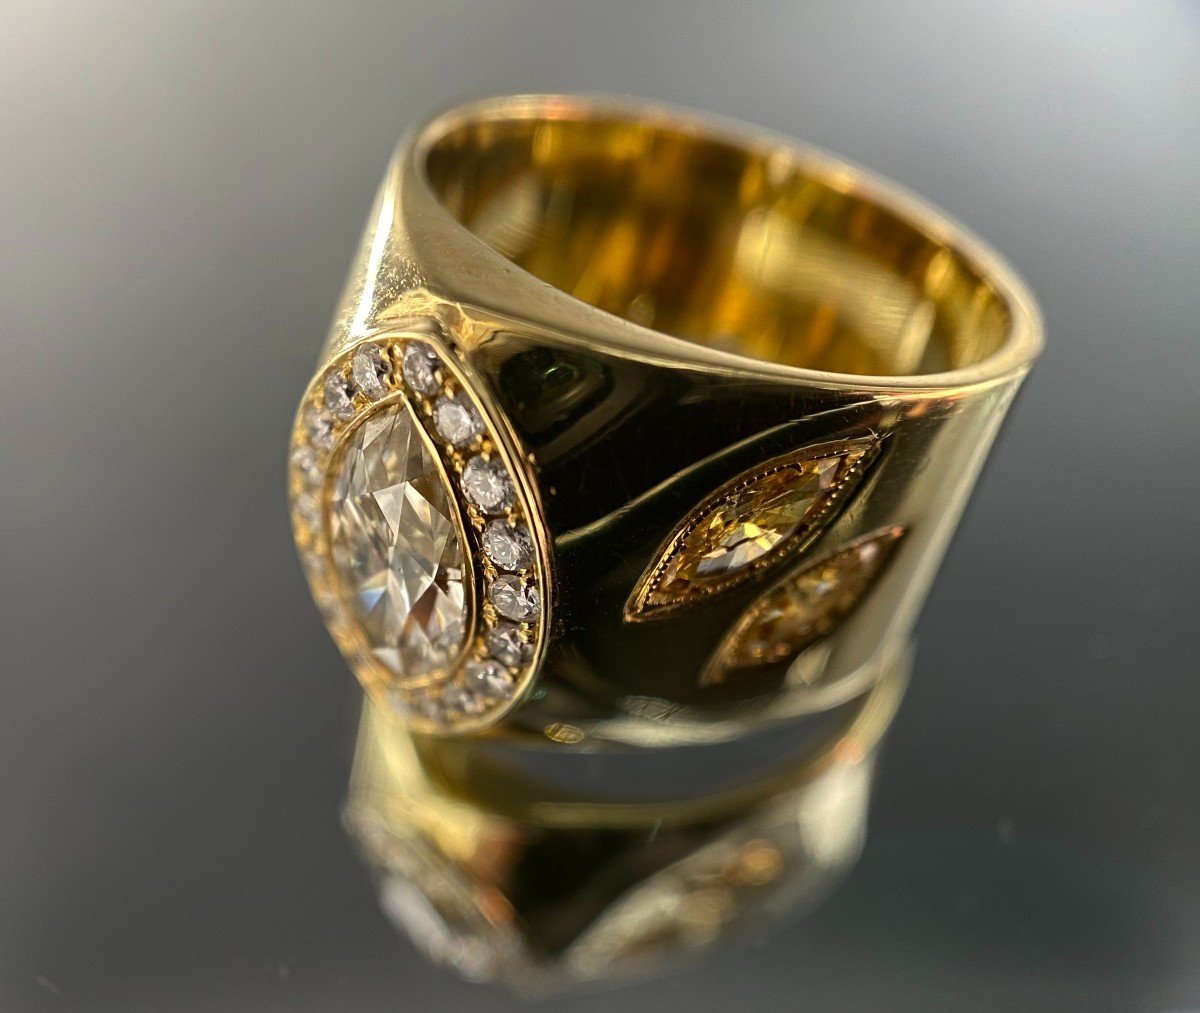 18k Yellow Gold Ring With Marquise Cut Diamond Of 1.50 Carats (si - G / H)-photo-4